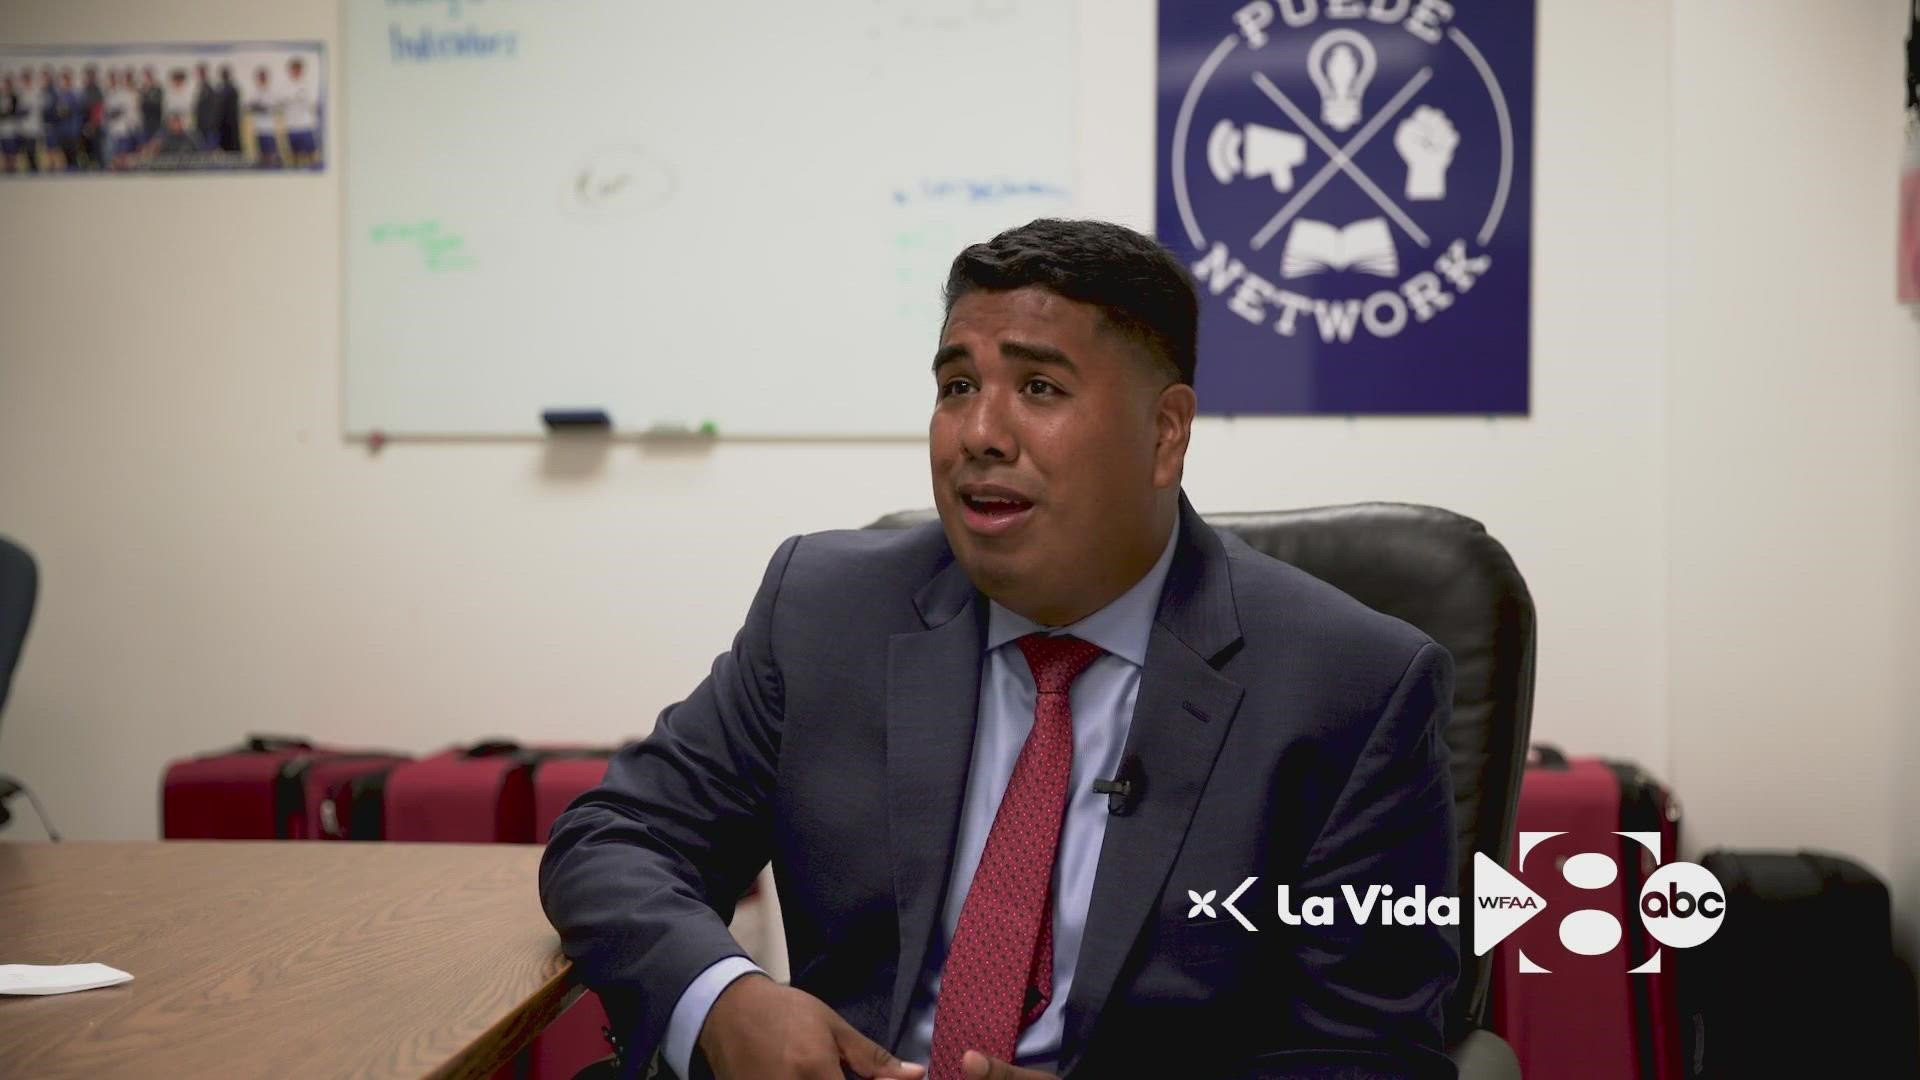 Adan Gonzalez, a son of immigrants, talks about his upbringing and how his experiences led to him creating Puede Network, an effort to empower youth.